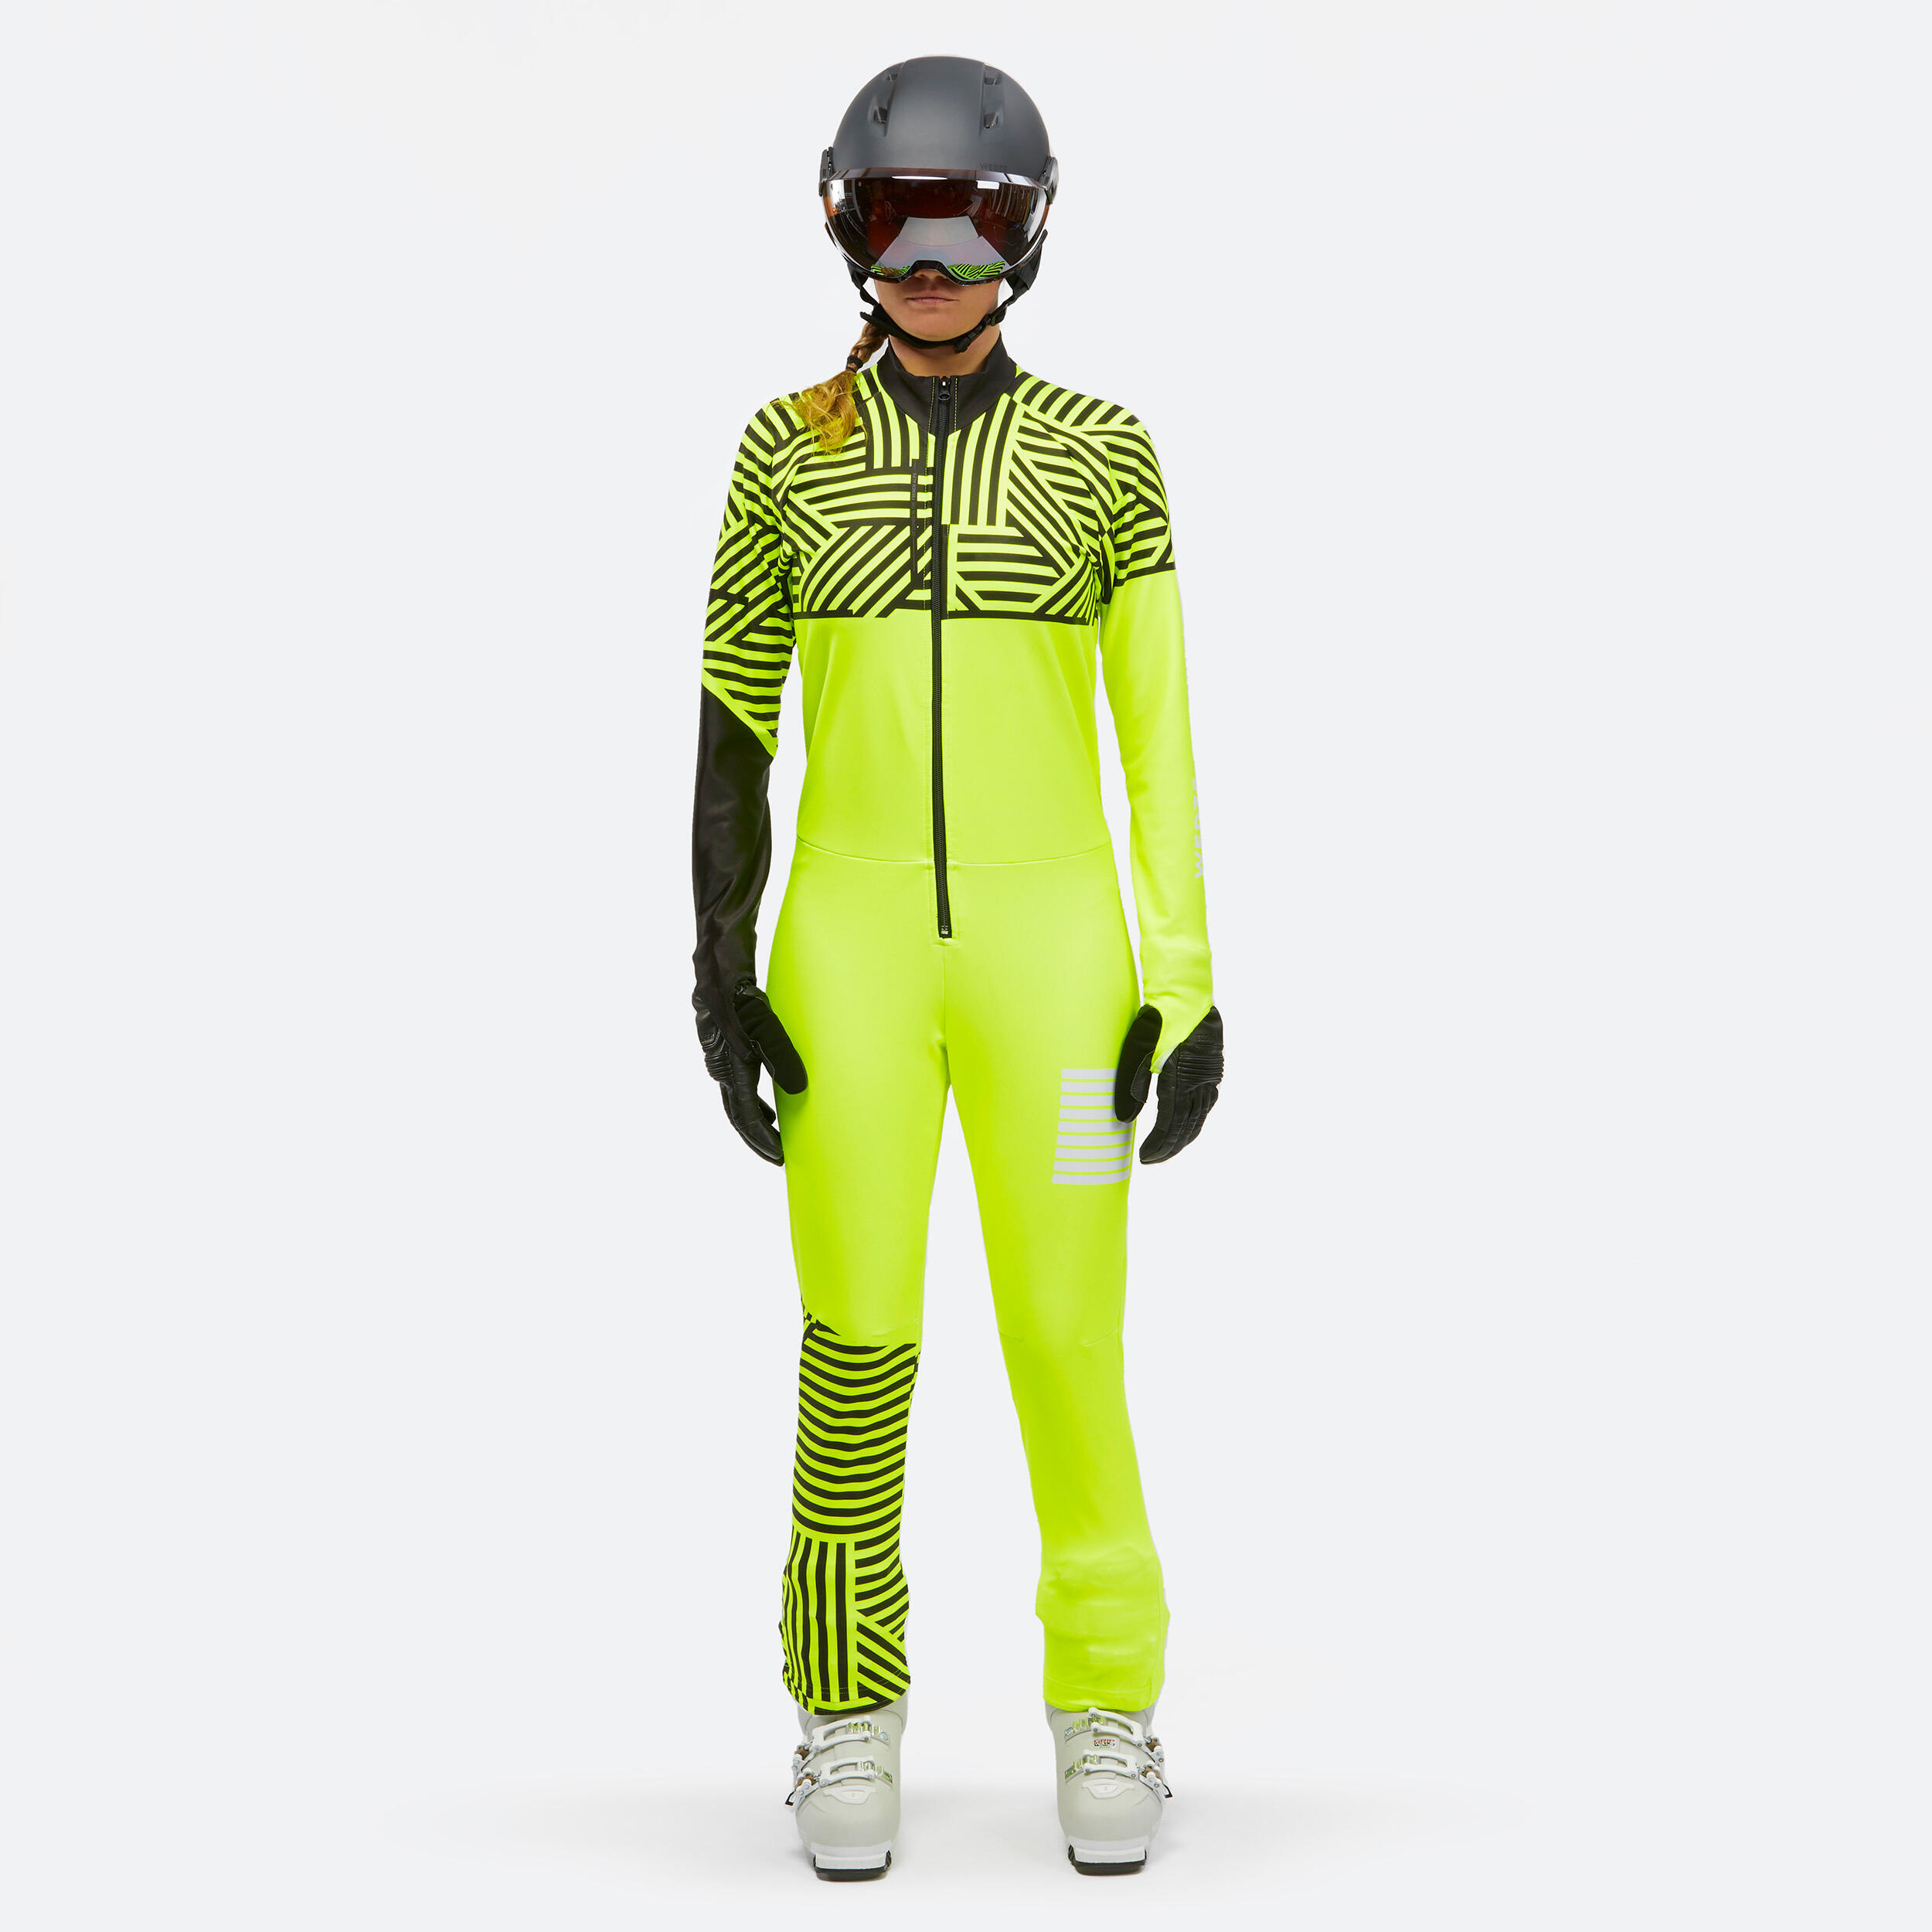 ADULT COMPETITION SKI SUIT 980 - YELLOW 2/7